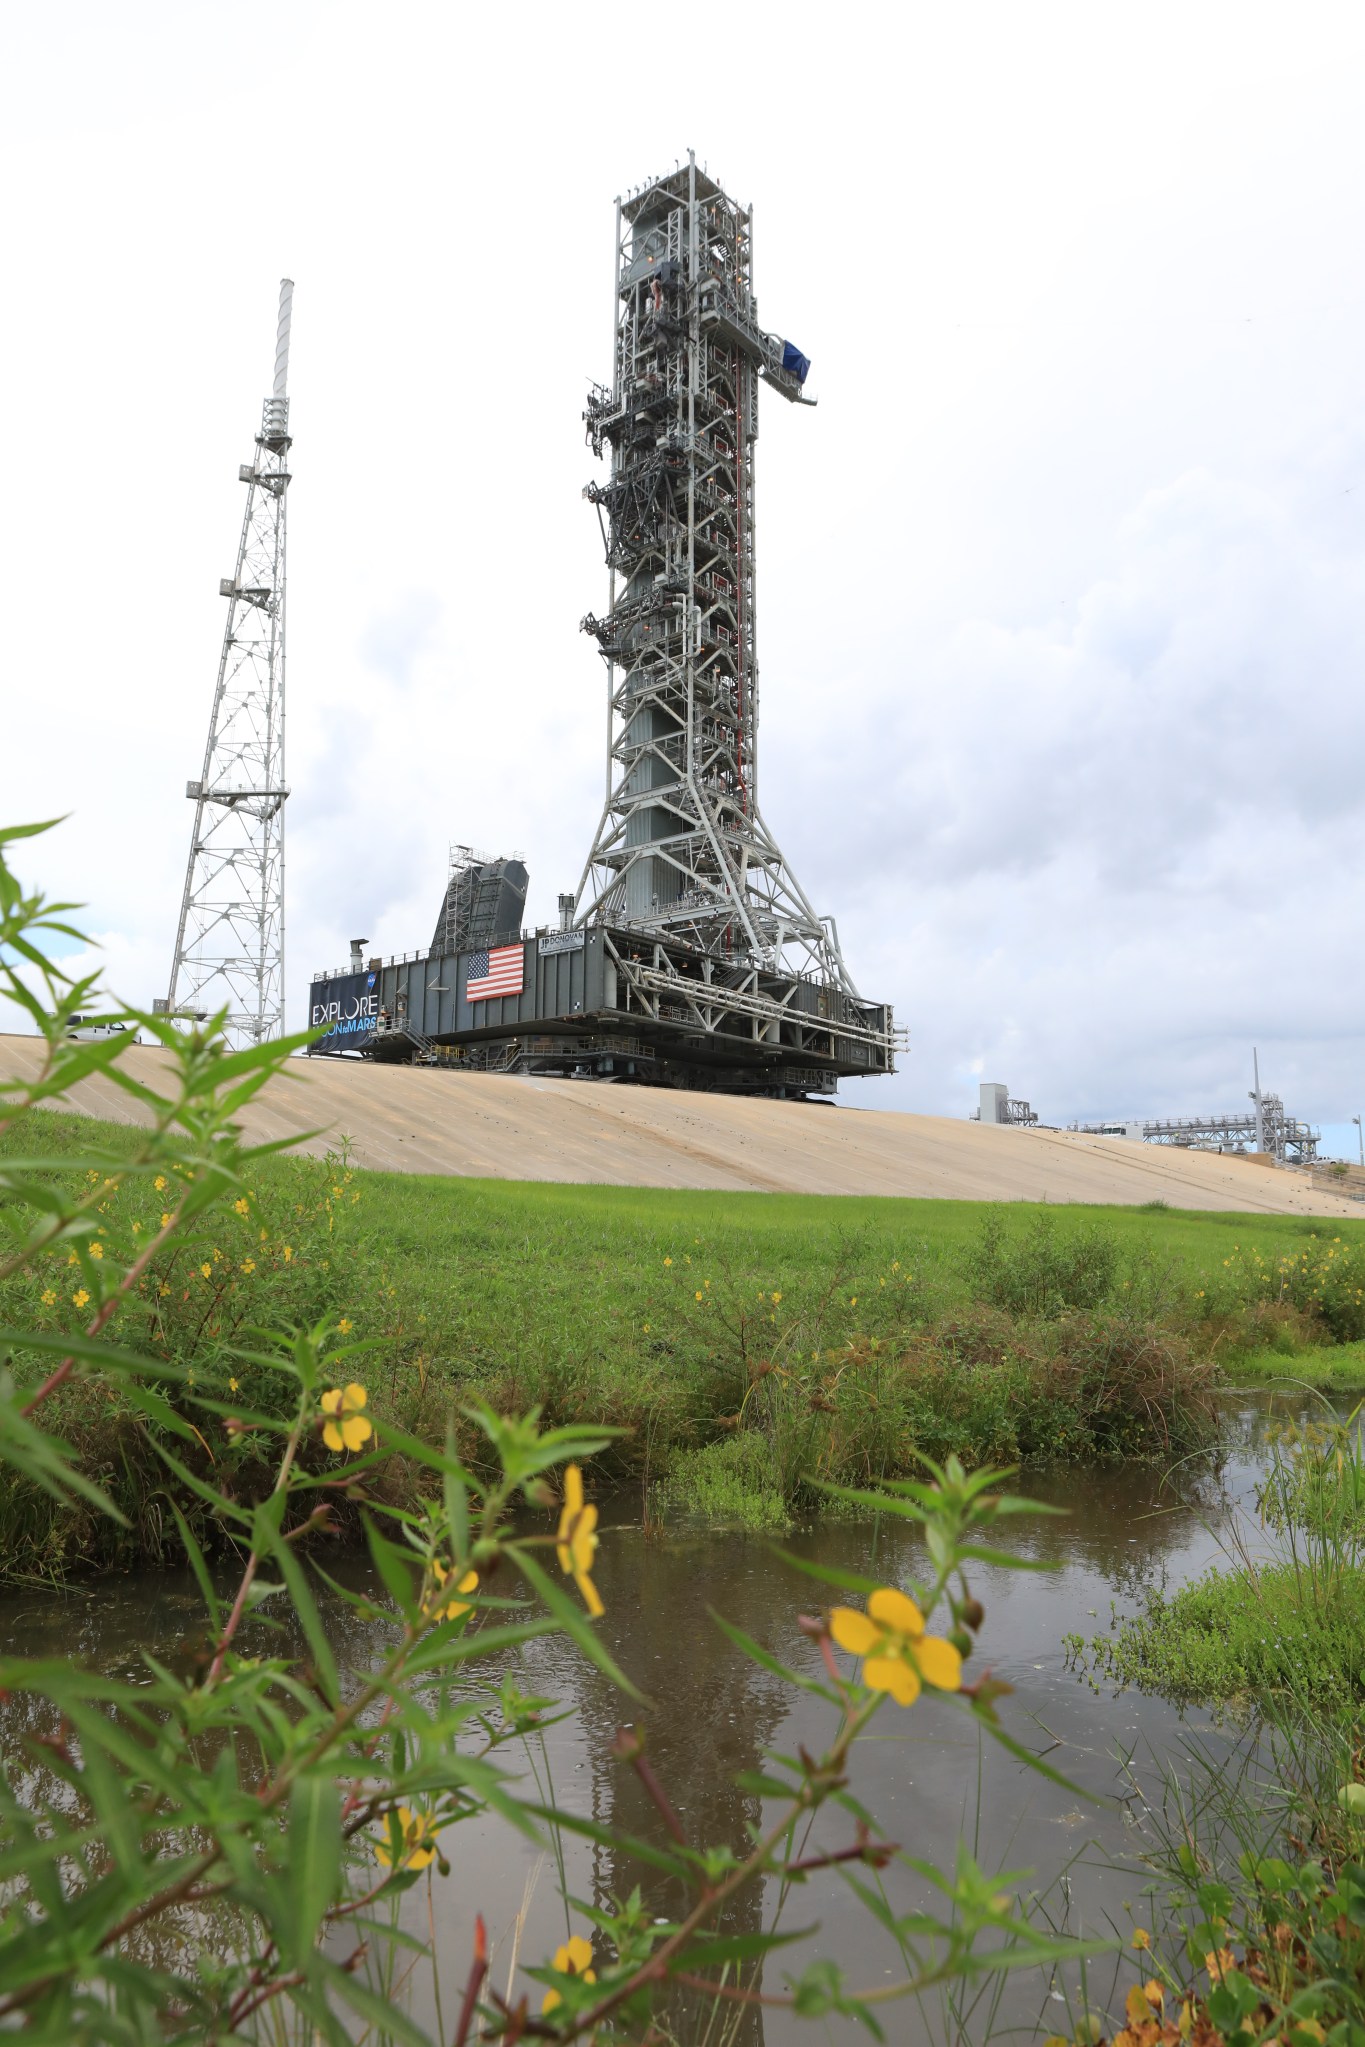 Exploration Ground Systems' mobile launcher photographed at Kennedy Space Center's Launch Complex 39B at the pad surface.